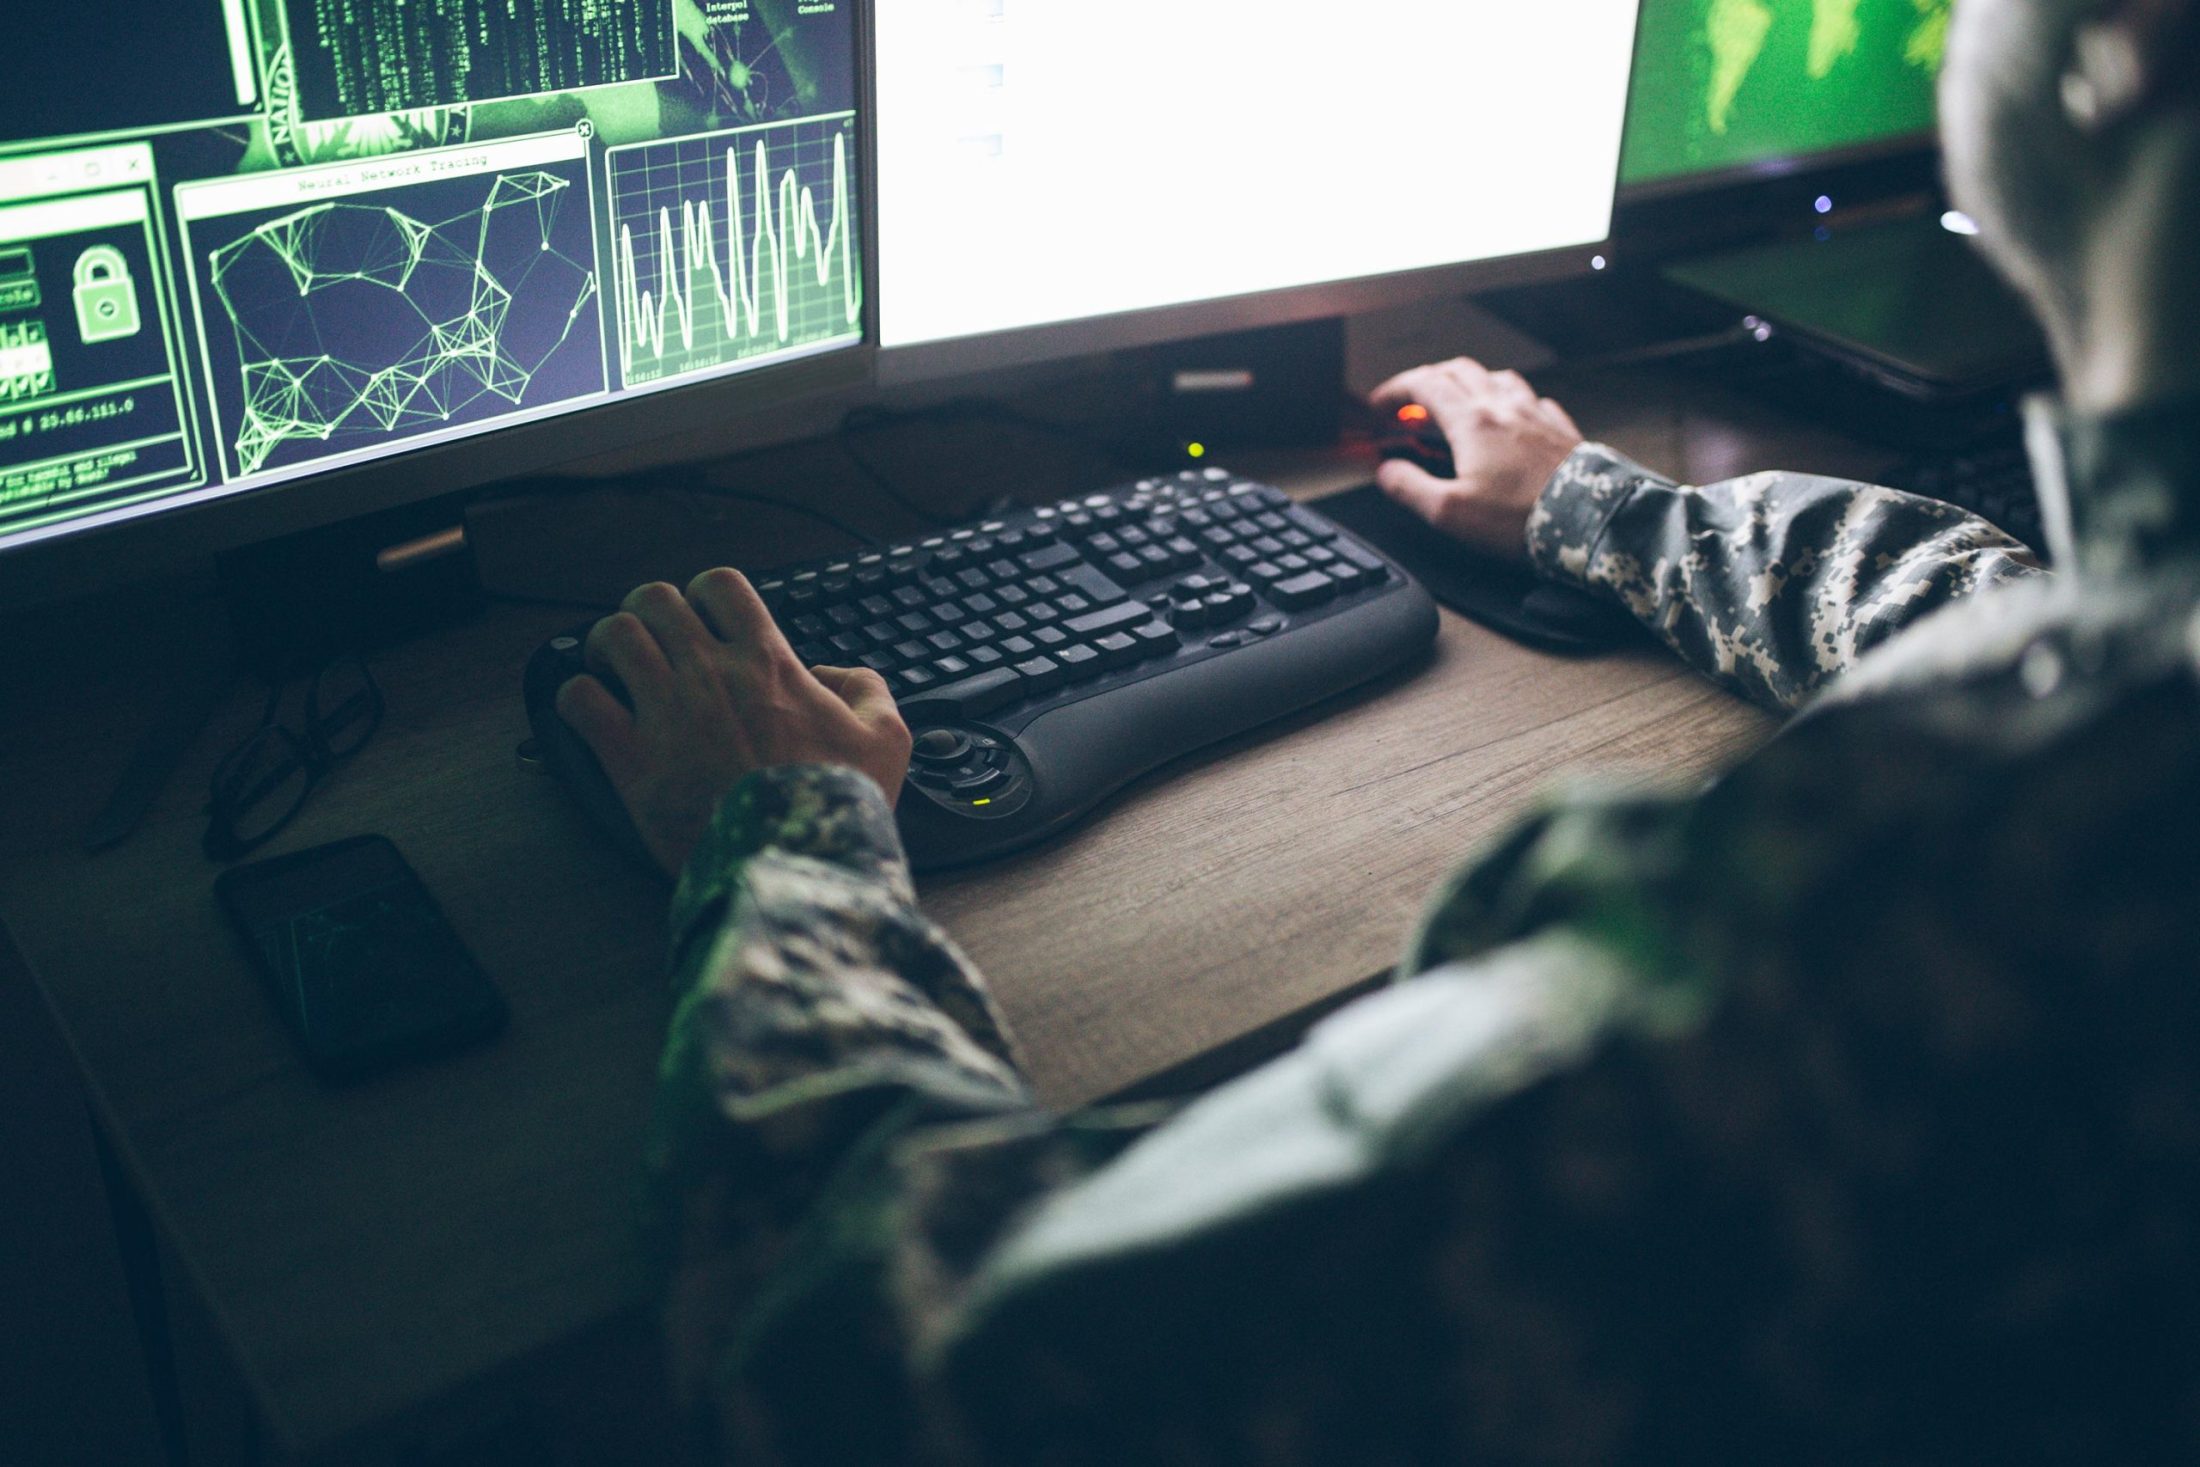 A man in camouflage is working on a computer.